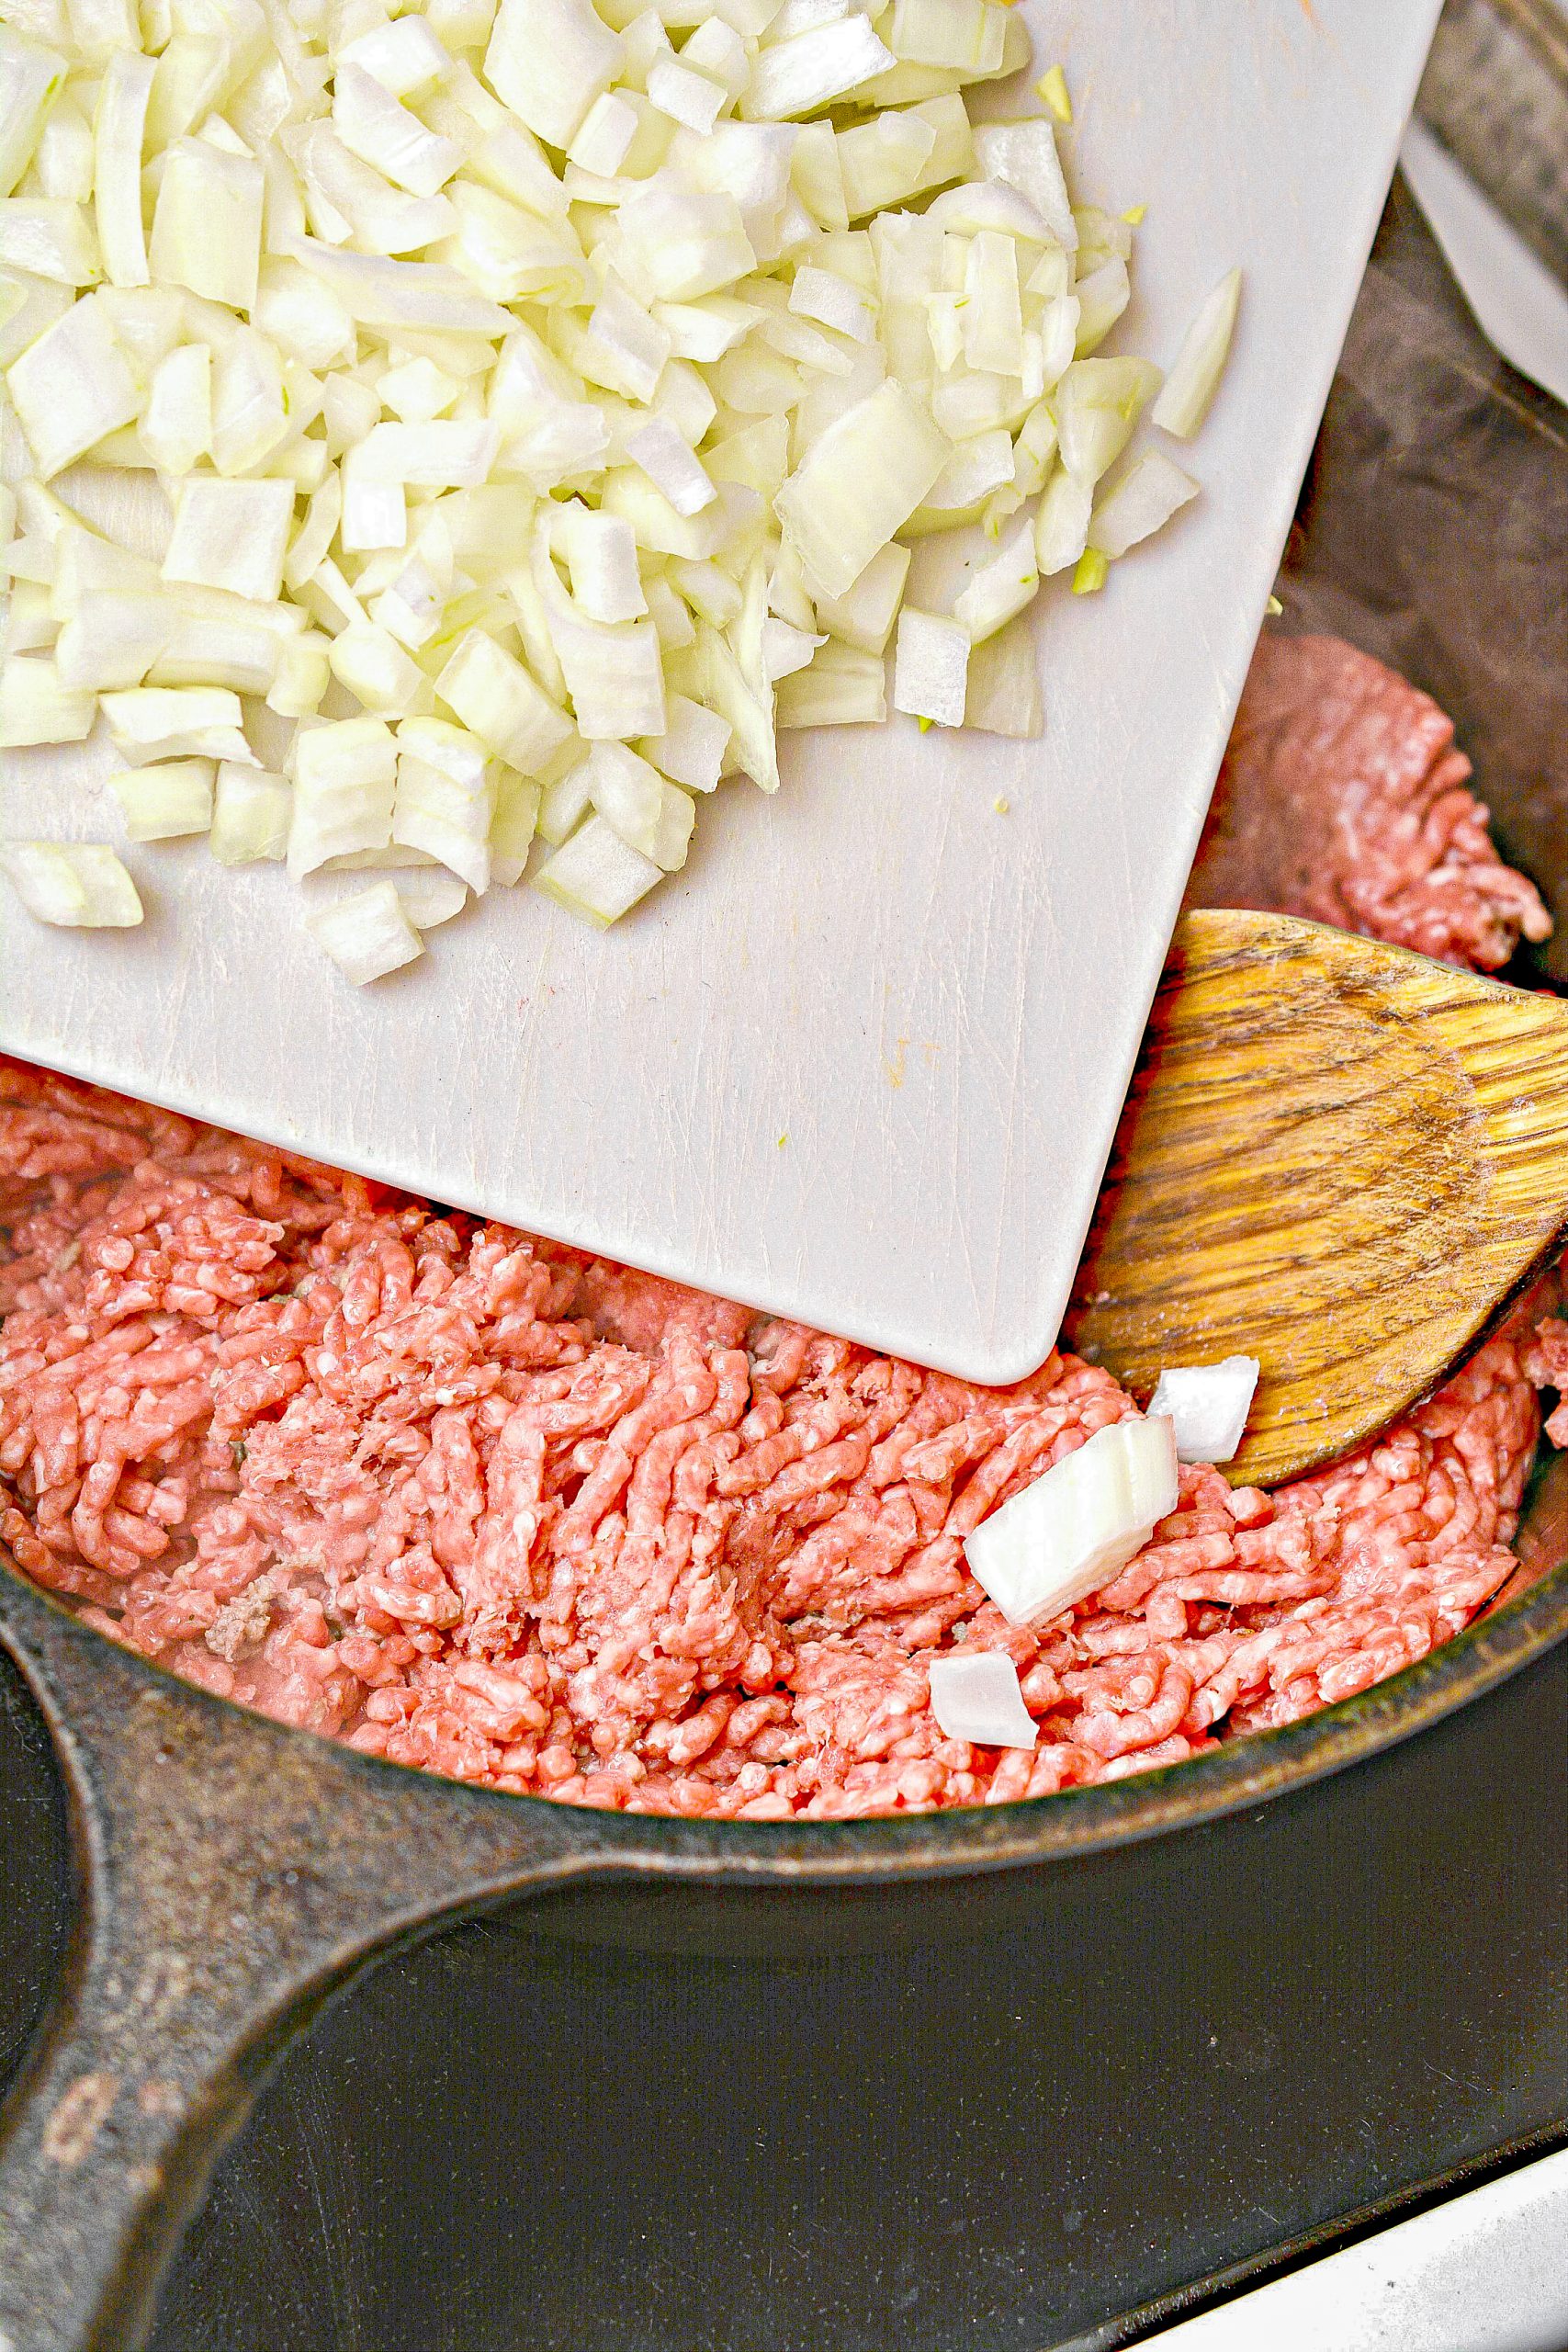 Add the olive oil, ground beef, and onions to the skillet, and saute until the beef is completely browned. Drain any excess fat.